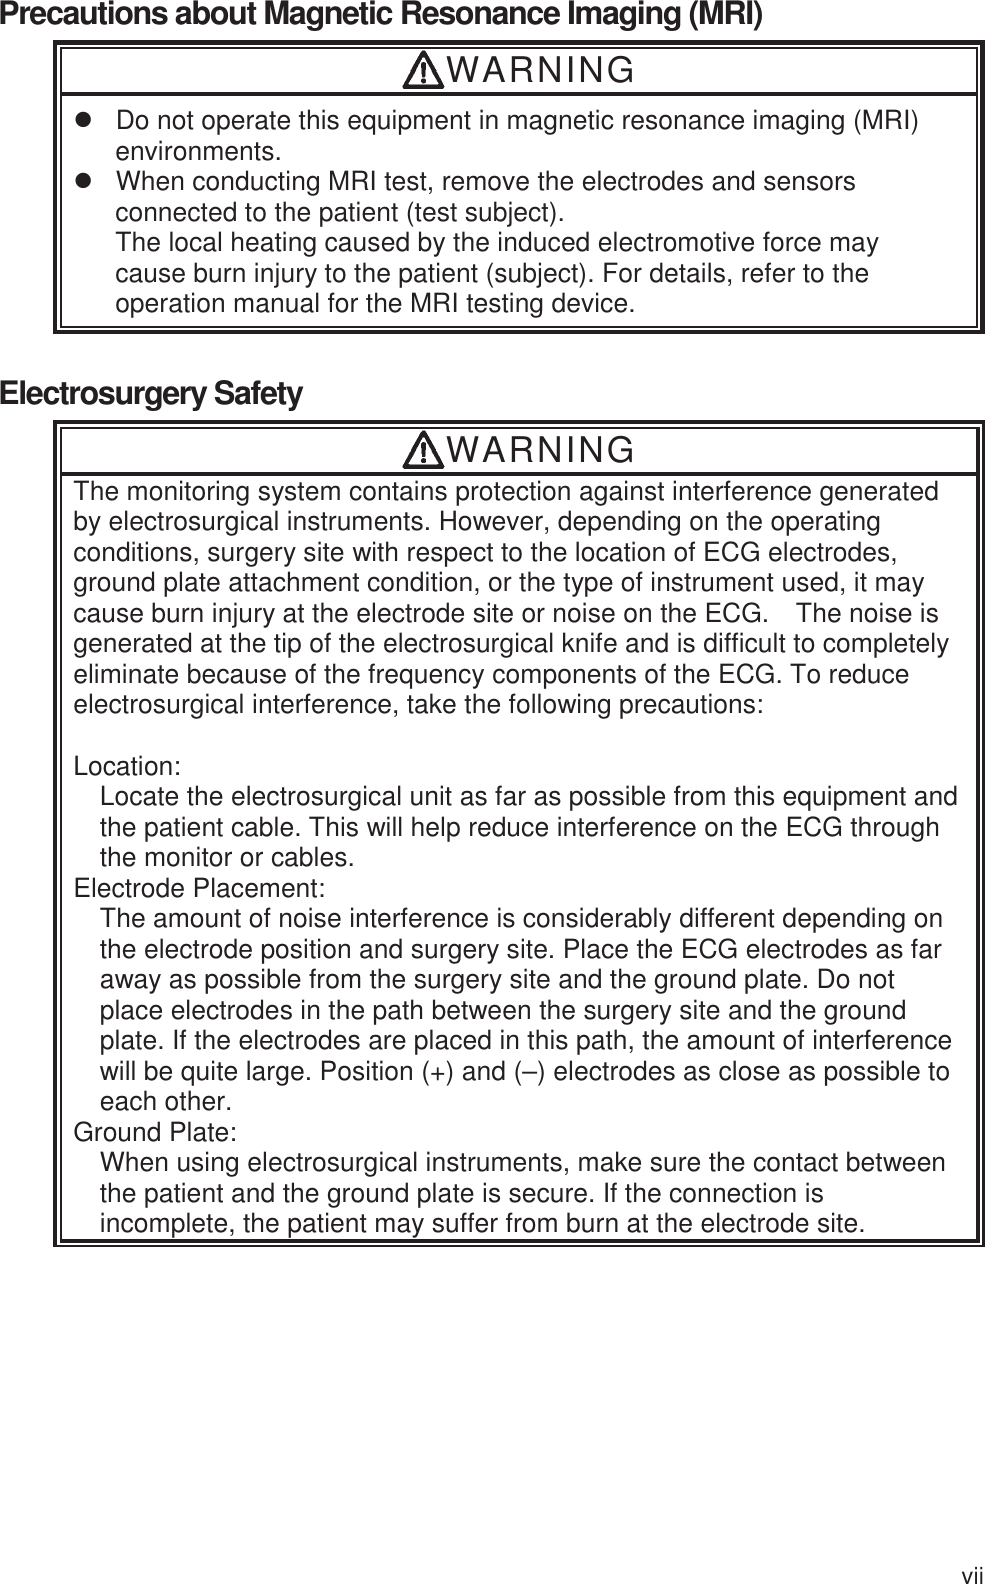 vii Precautions about Magnetic Resonance Imaging (MRI) WARNING z  Do not operate this equipment in magnetic resonance imaging (MRI) environments. z  When conducting MRI test, remove the electrodes and sensors connected to the patient (test subject). The local heating caused by the induced electromotive force may cause burn injury to the patient (subject). For details, refer to the operation manual for the MRI testing device.  Electrosurgery Safety WARNING The monitoring system contains protection against interference generated by electrosurgical instruments. However, depending on the operating conditions, surgery site with respect to the location of ECG electrodes, ground plate attachment condition, or the type of instrument used, it may cause burn injury at the electrode site or noise on the ECG.    The noise is generated at the tip of the electrosurgical knife and is difficult to completely eliminate because of the frequency components of the ECG. To reduce electrosurgical interference, take the following precautions:  Location: Locate the electrosurgical unit as far as possible from this equipment and the patient cable. This will help reduce interference on the ECG through the monitor or cables. Electrode Placement: The amount of noise interference is considerably different depending on the electrode position and surgery site. Place the ECG electrodes as far away as possible from the surgery site and the ground plate. Do not place electrodes in the path between the surgery site and the ground plate. If the electrodes are placed in this path, the amount of interference will be quite large. Position (+) and (–) electrodes as close as possible to each other. Ground Plate: When using electrosurgical instruments, make sure the contact between the patient and the ground plate is secure. If the connection is incomplete, the patient may suffer from burn at the electrode site. 